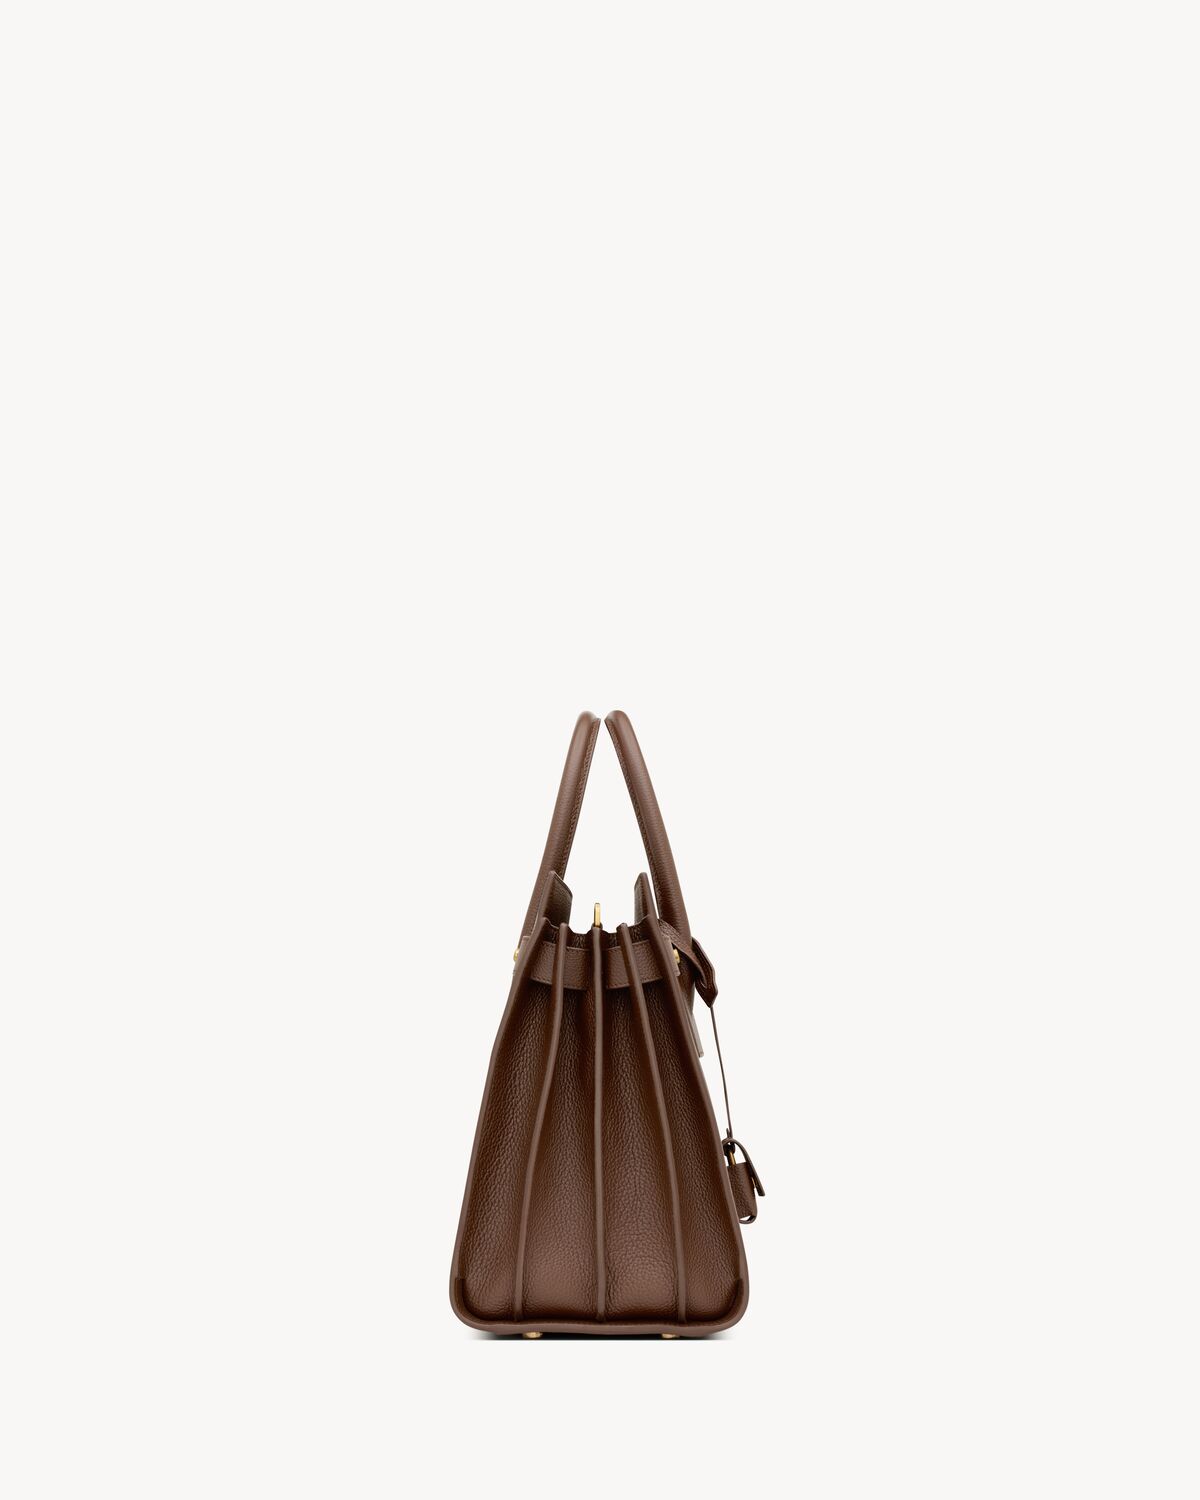 SAC DE JOUR SMALL IN SUPPLE GRAINED LEATHER